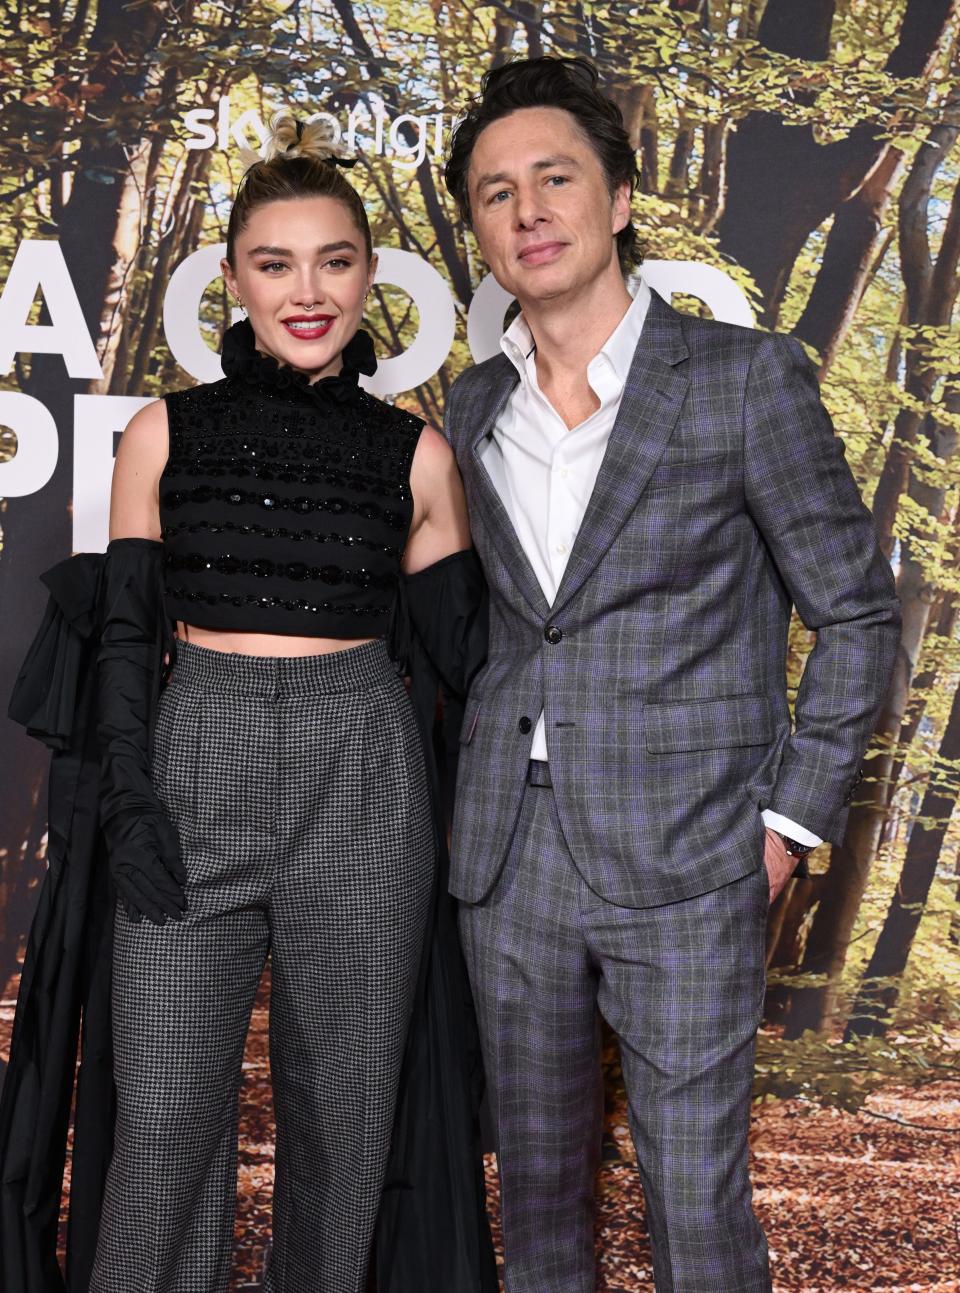 Florence Pugh and Zach Braff at the UK premiere of "A Good Person."